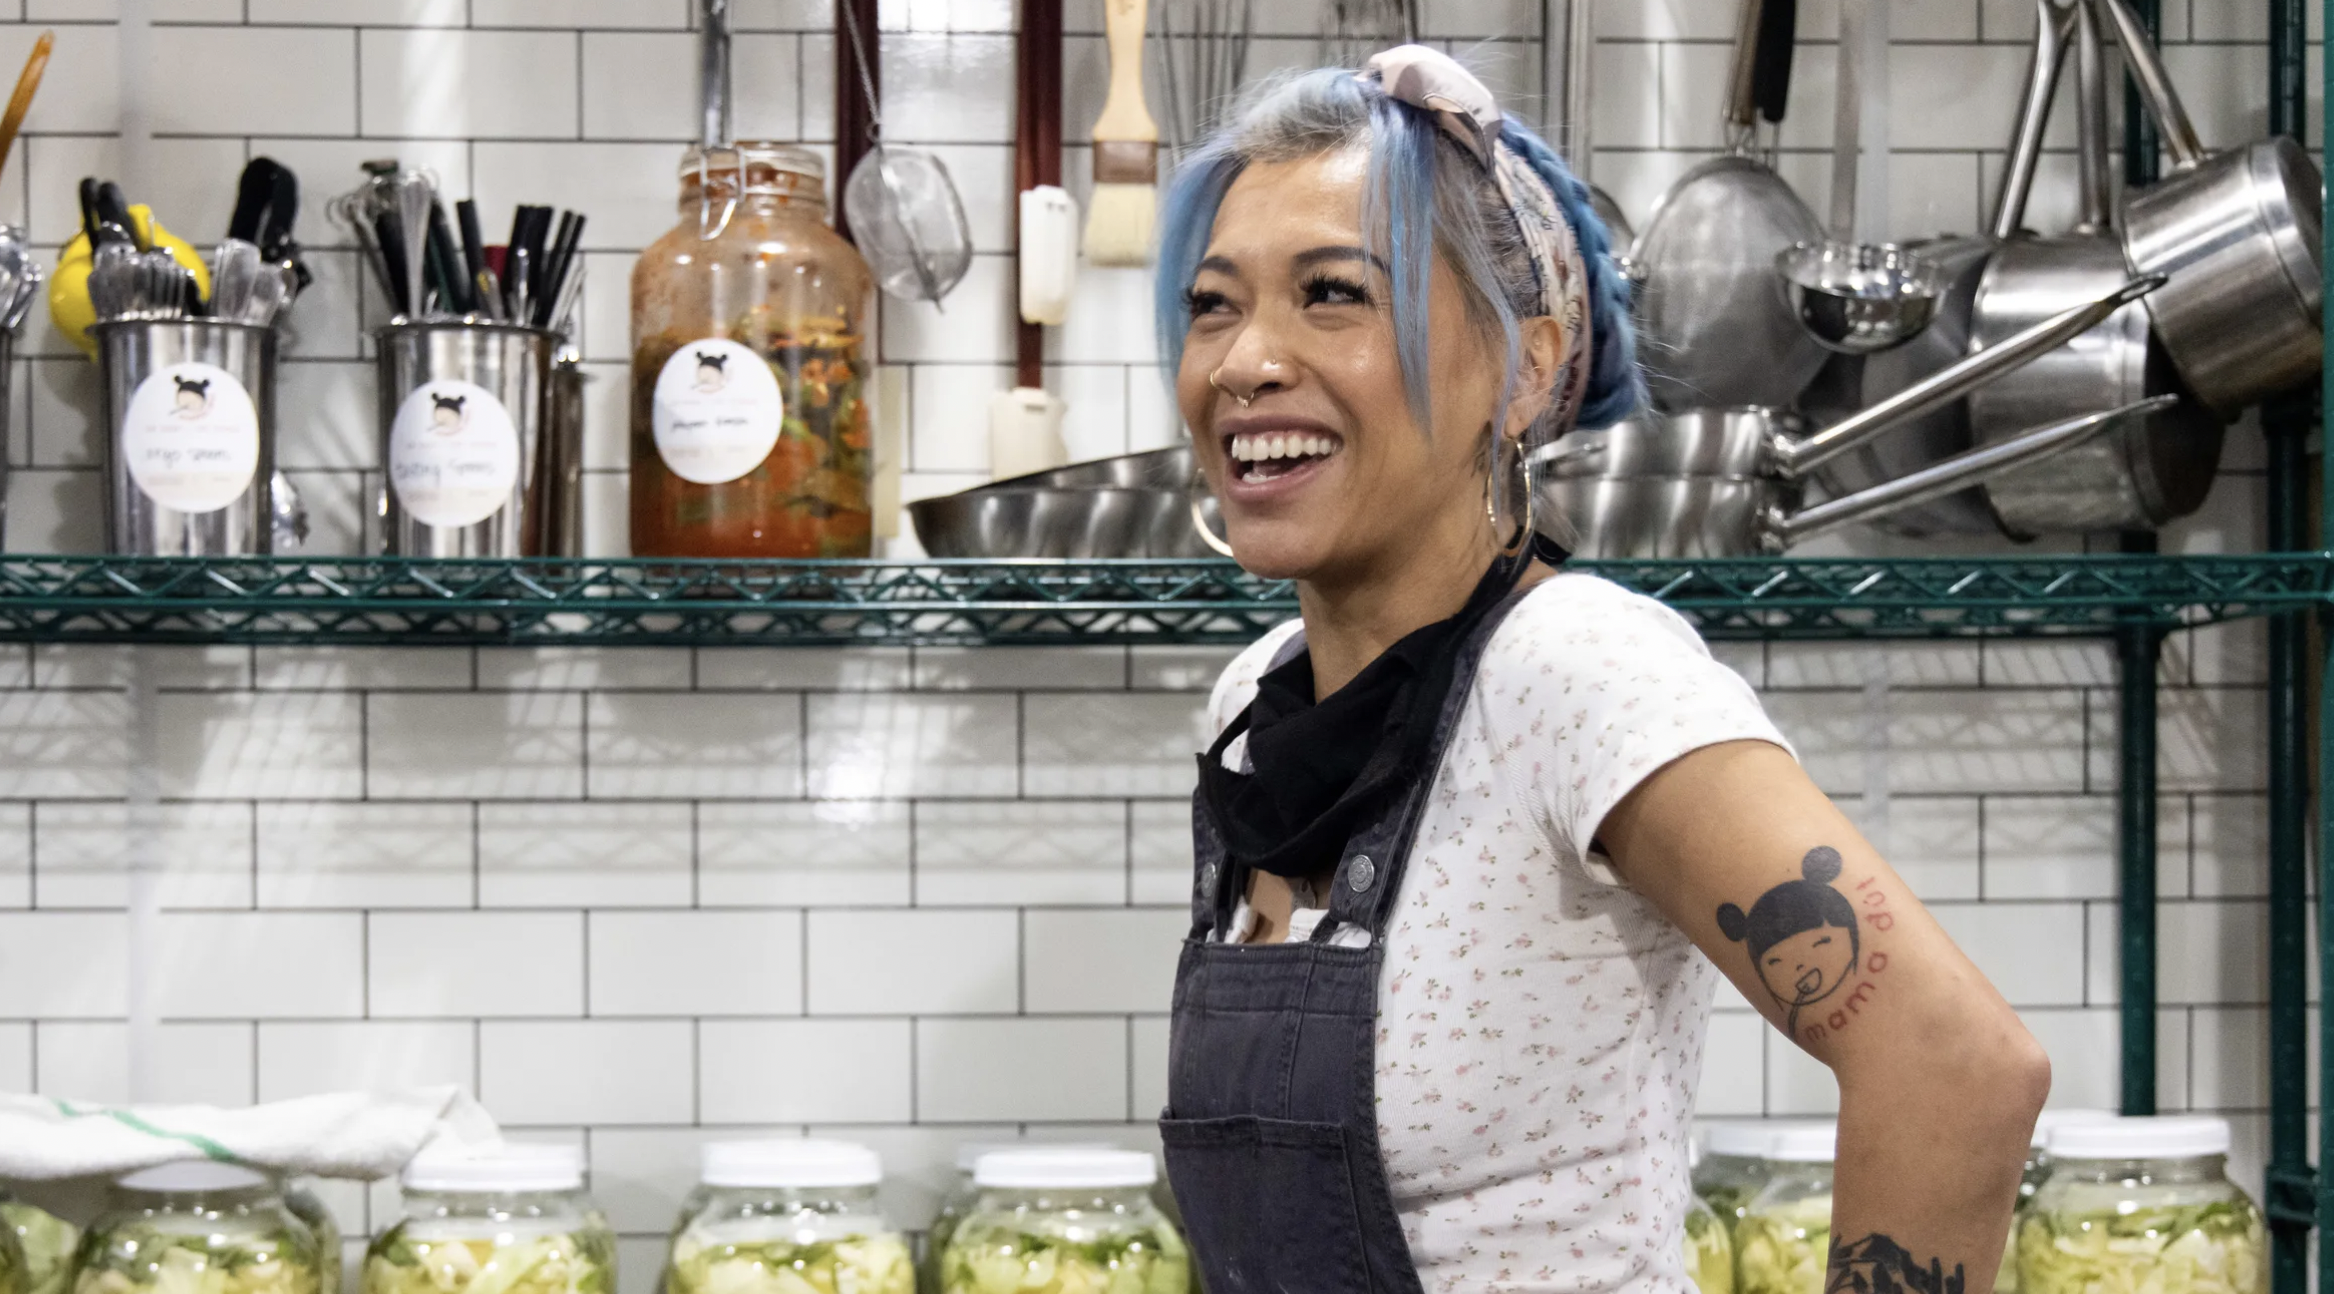 Mama Dút owner Thuy Pham stands in front of a white tile wall hung with kitchen racks